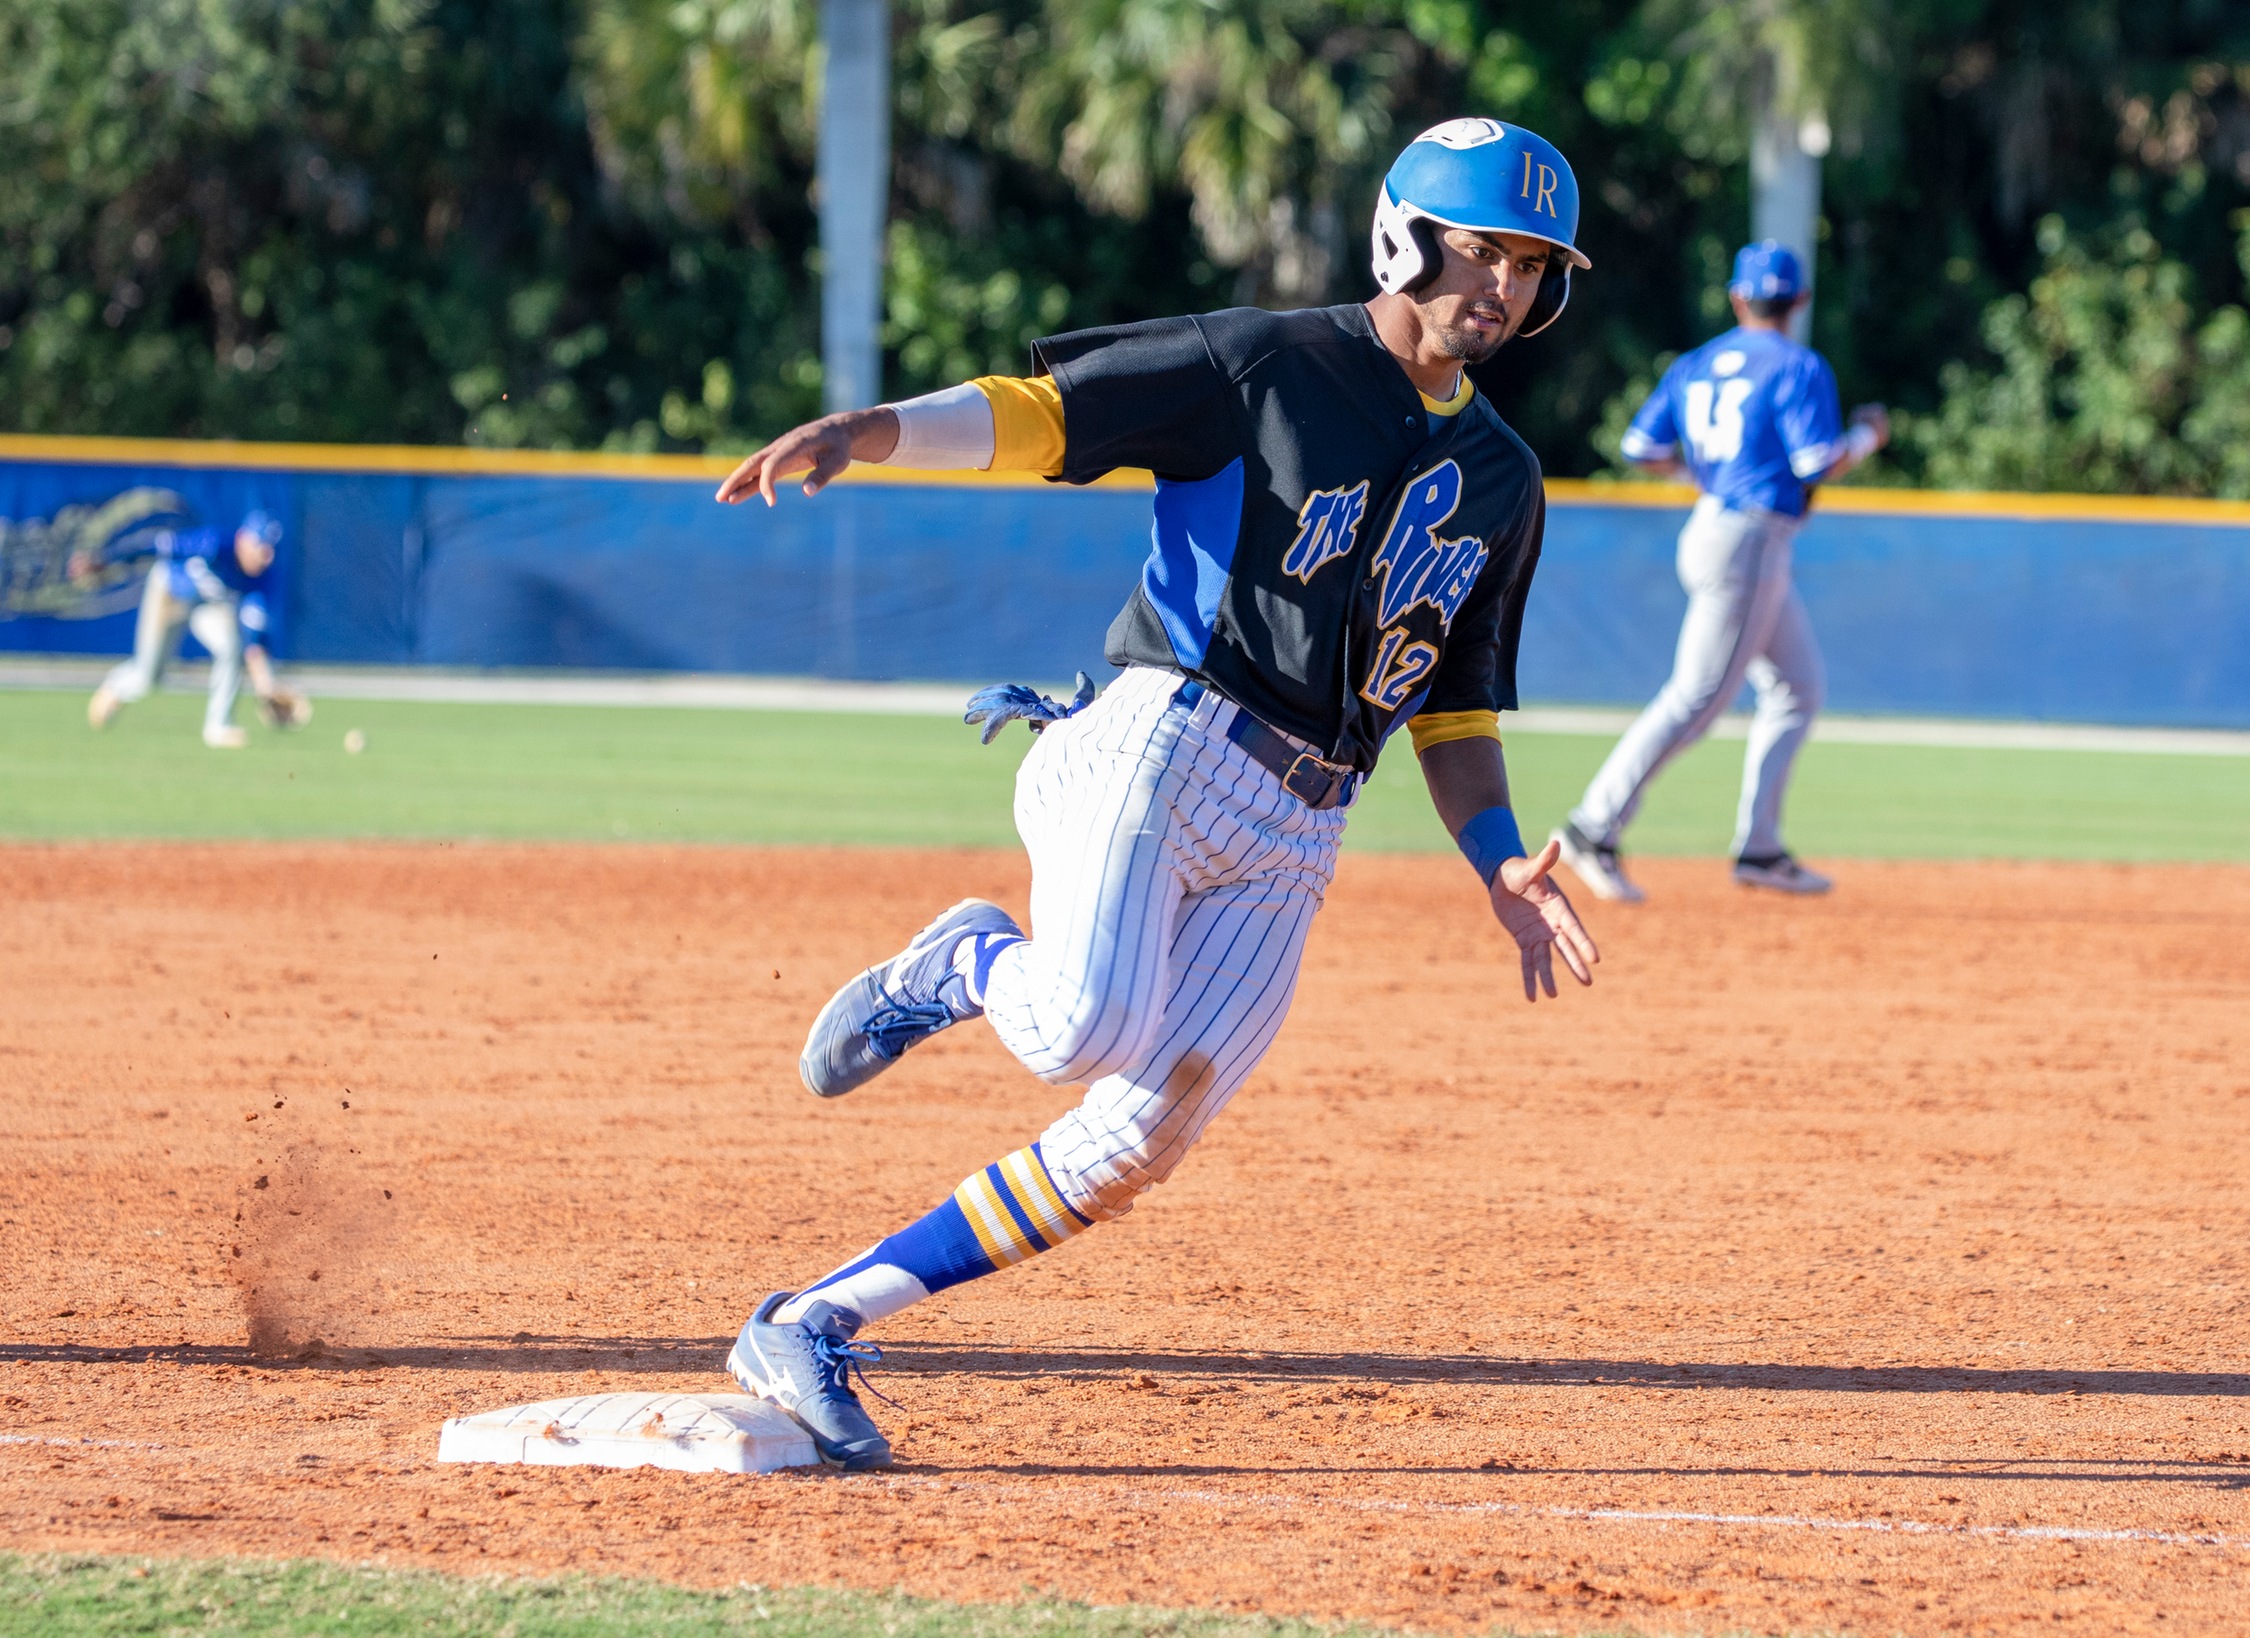 Bats Blistered As Indian River State College Pioneers Falls to College of Central Florida Patriots